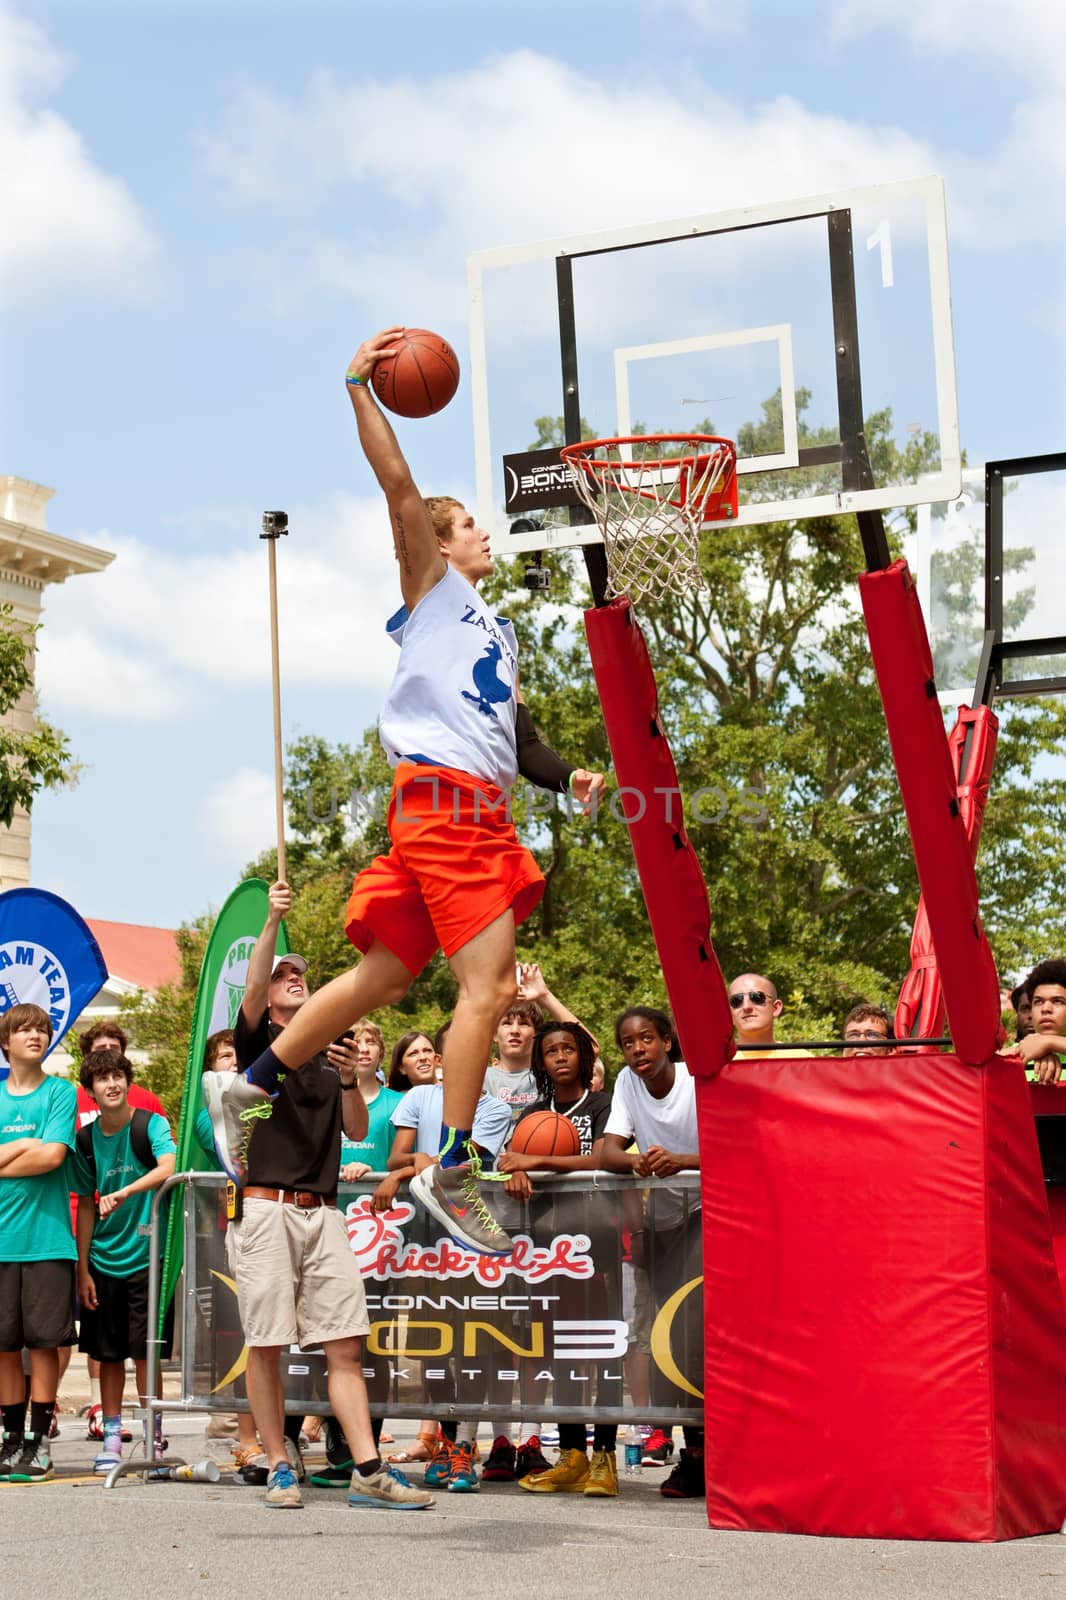 Athens, GA, USA - August 24, 2013:  A young man elevates above the rim to dunk a basketball in the slam dunk competition of a 3-on-3 basketball tournament held in the streets of downtown Athens.